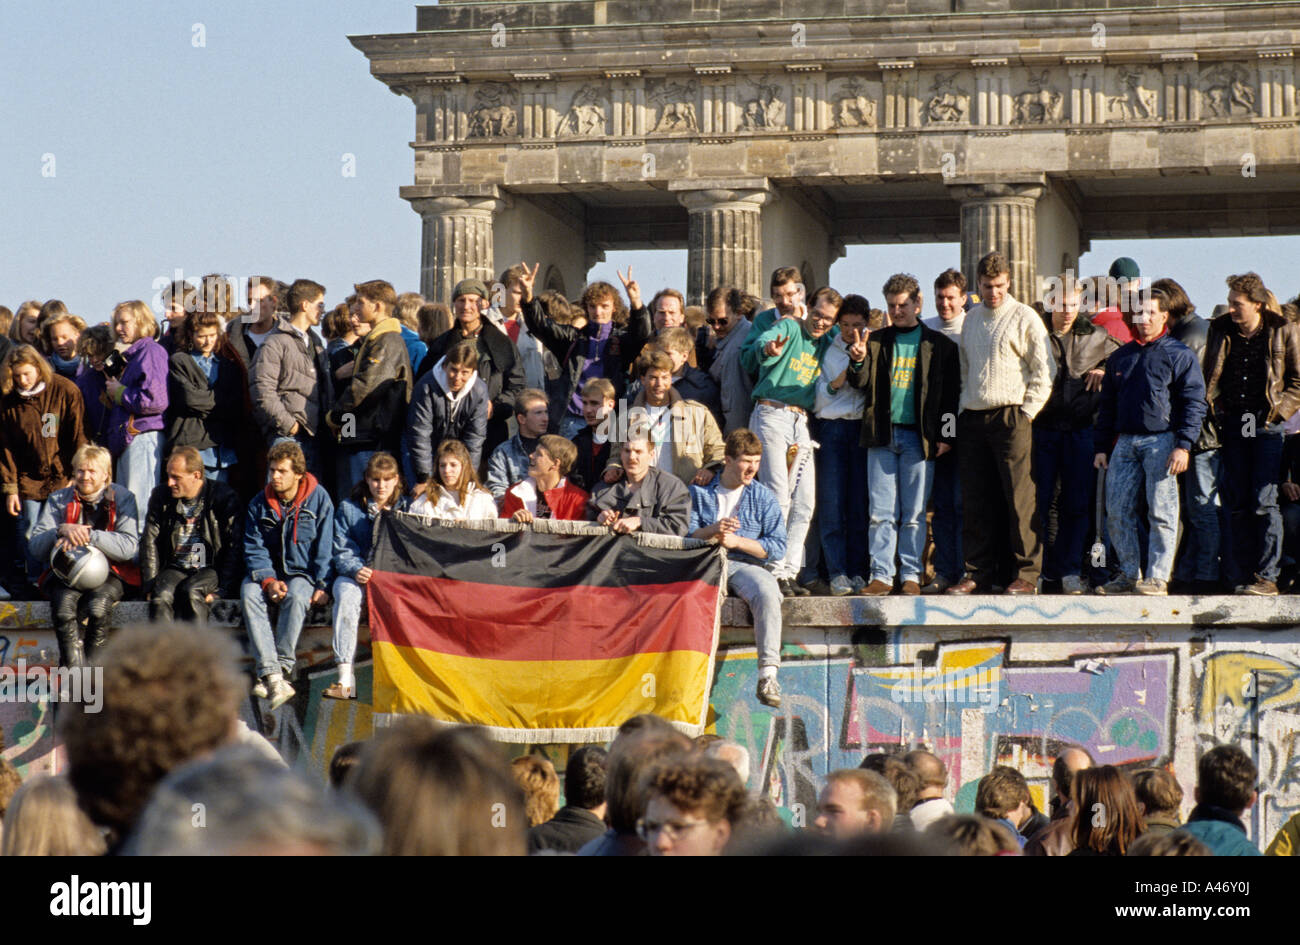 Fall of the Berlin Wall: people from East and West Berlin climbing on the Wall at the Brandenburg Gate, Berlin, Germany Stock Photo